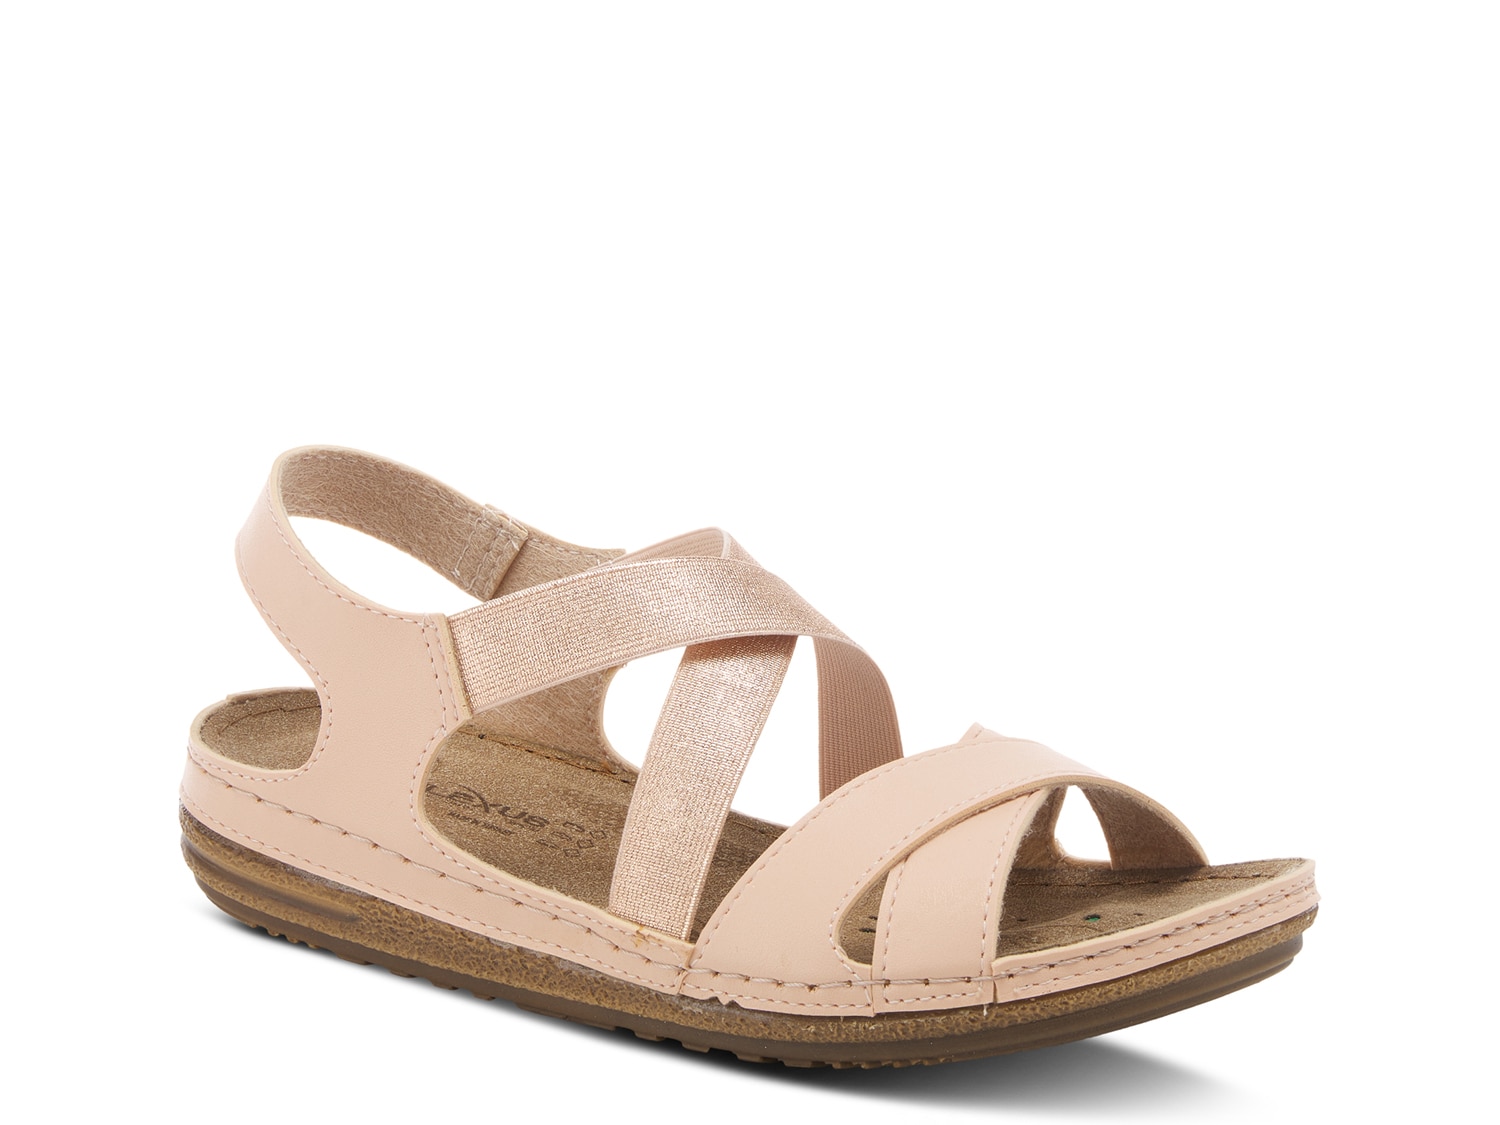 Flexus by Spring Step Swanson Wedge Sandal - Free Shipping | DSW